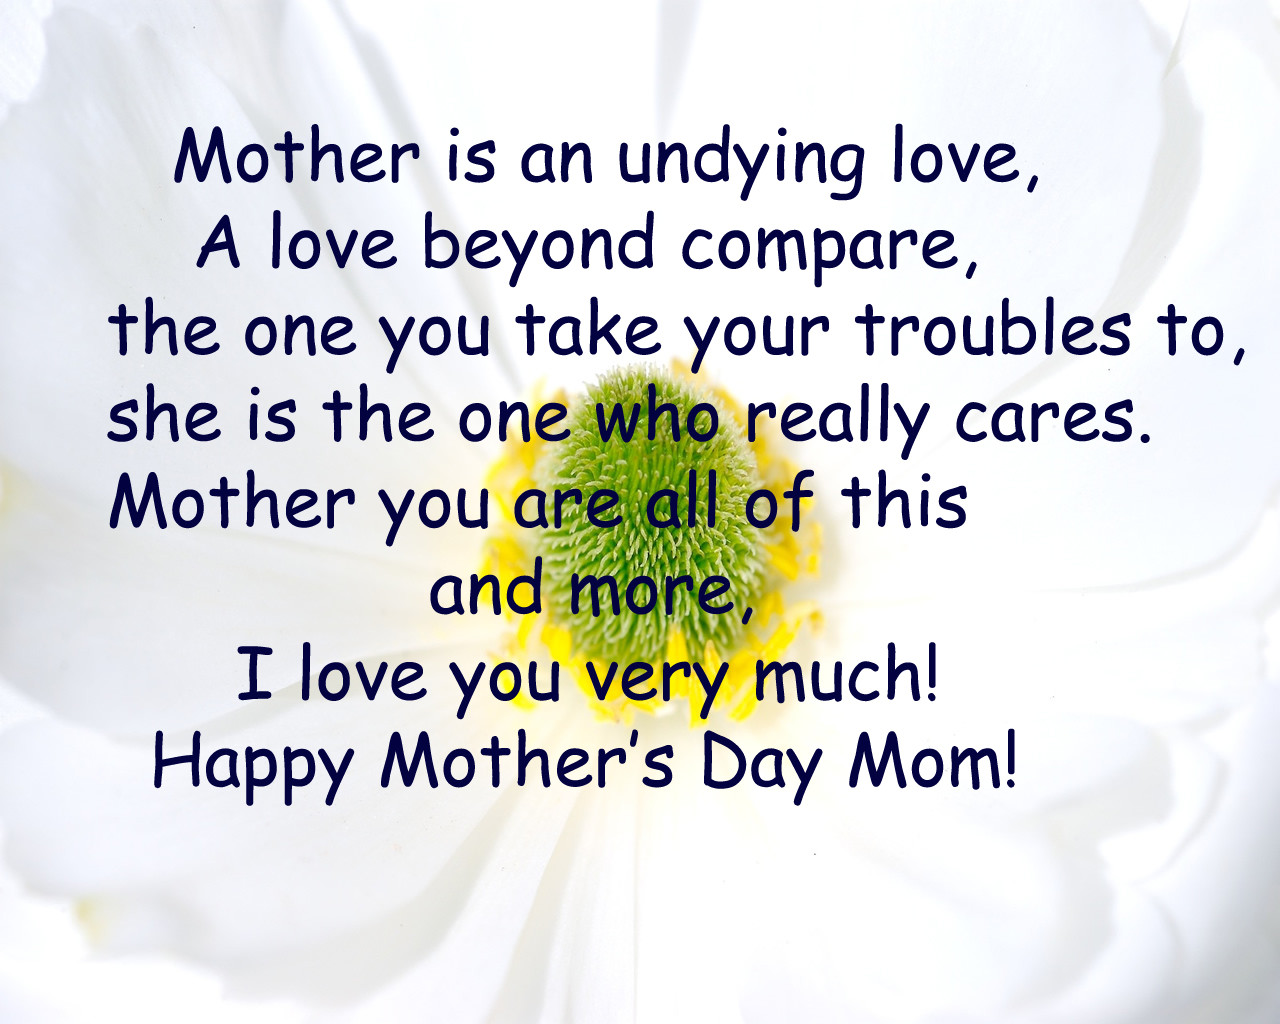 Mothers Day Sayings And Quotes
 Mothers Day Quotes From Son QuotesGram